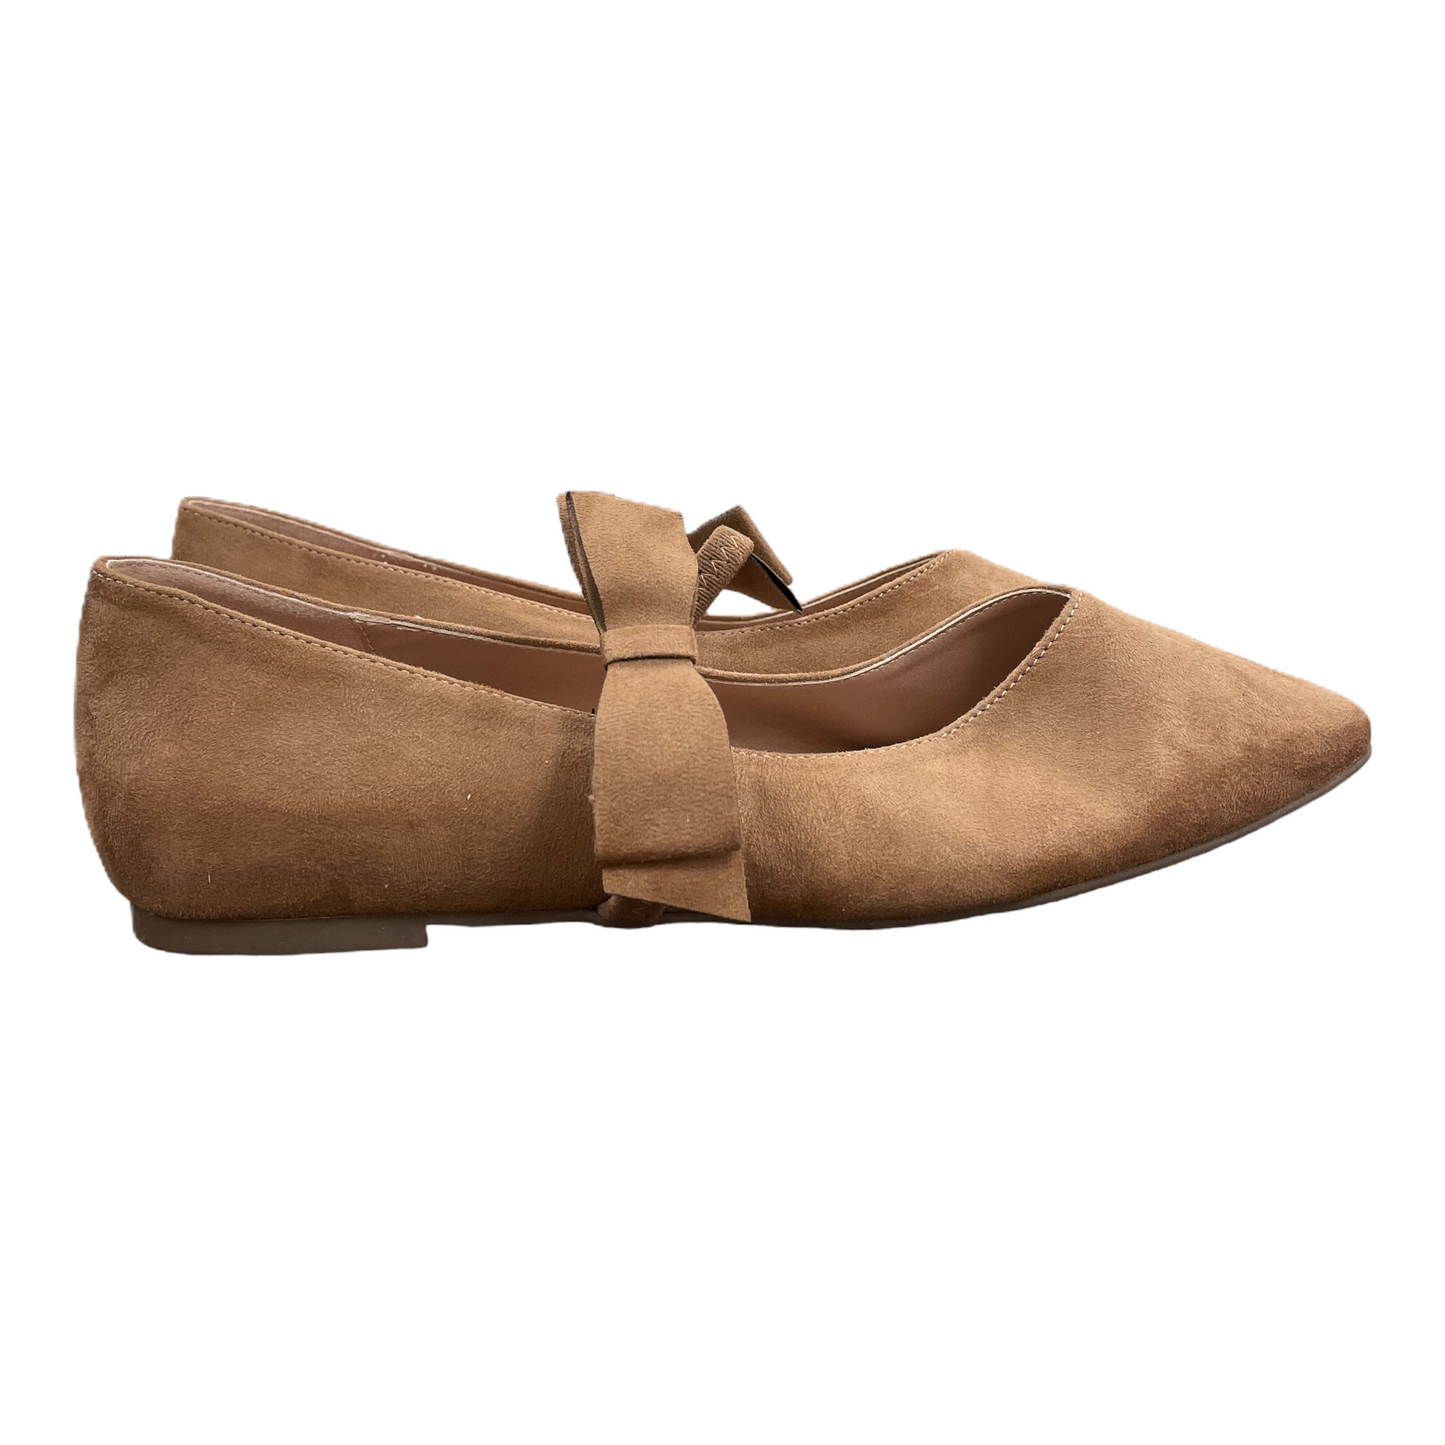 Brown Shoes Flats By Journee, Size: 9.5